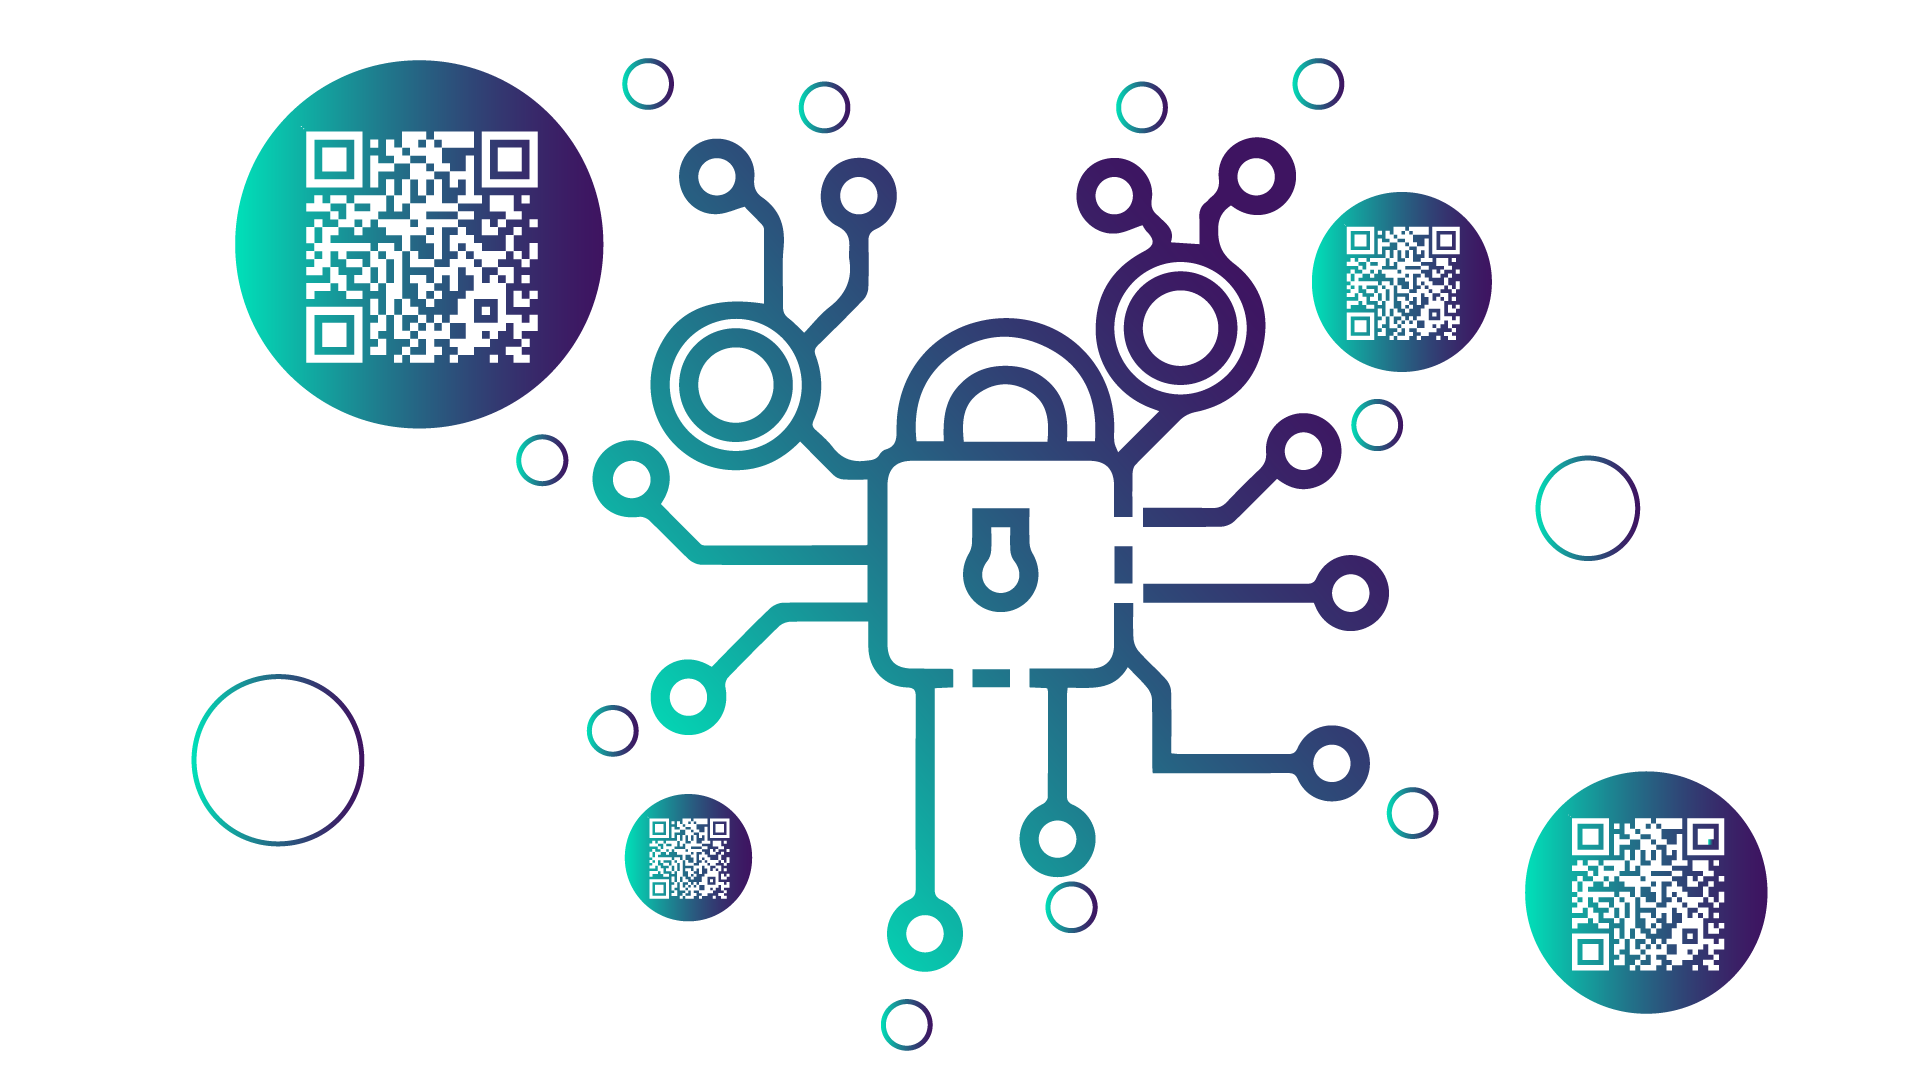 ALC Label graphic - security through QR codes and blockchain technology